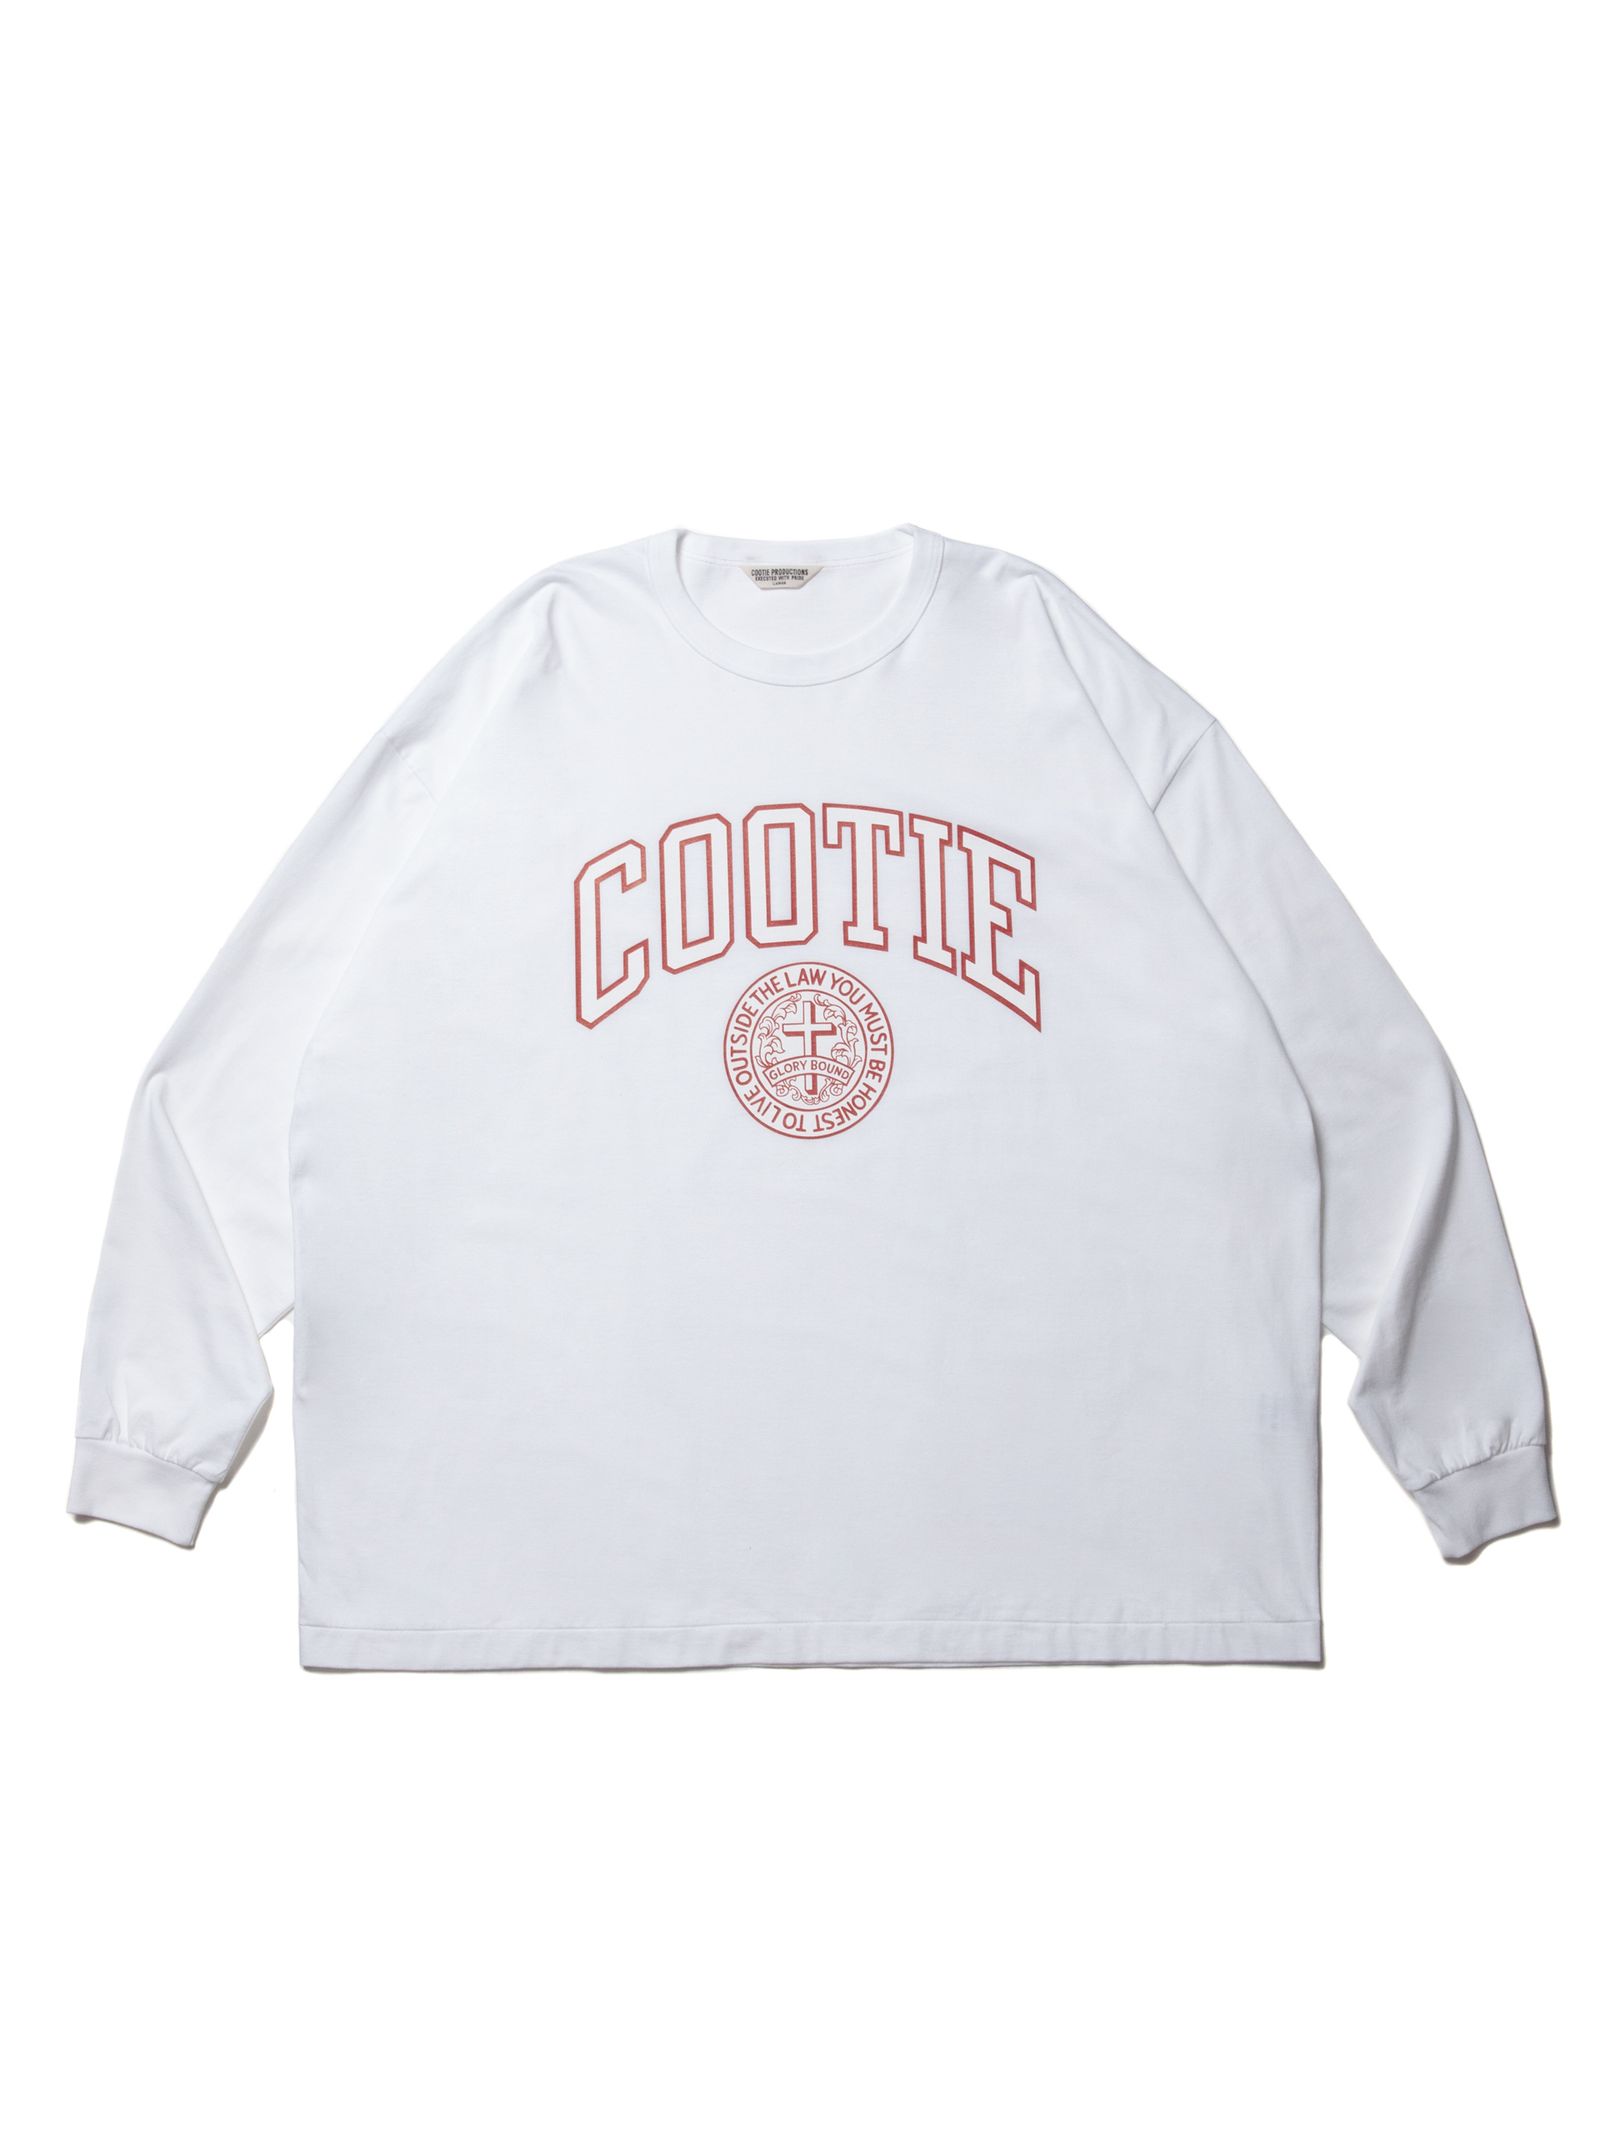 COOTIE PRODUCTIONS - Print Oversized L/S Tee (COLLEGE